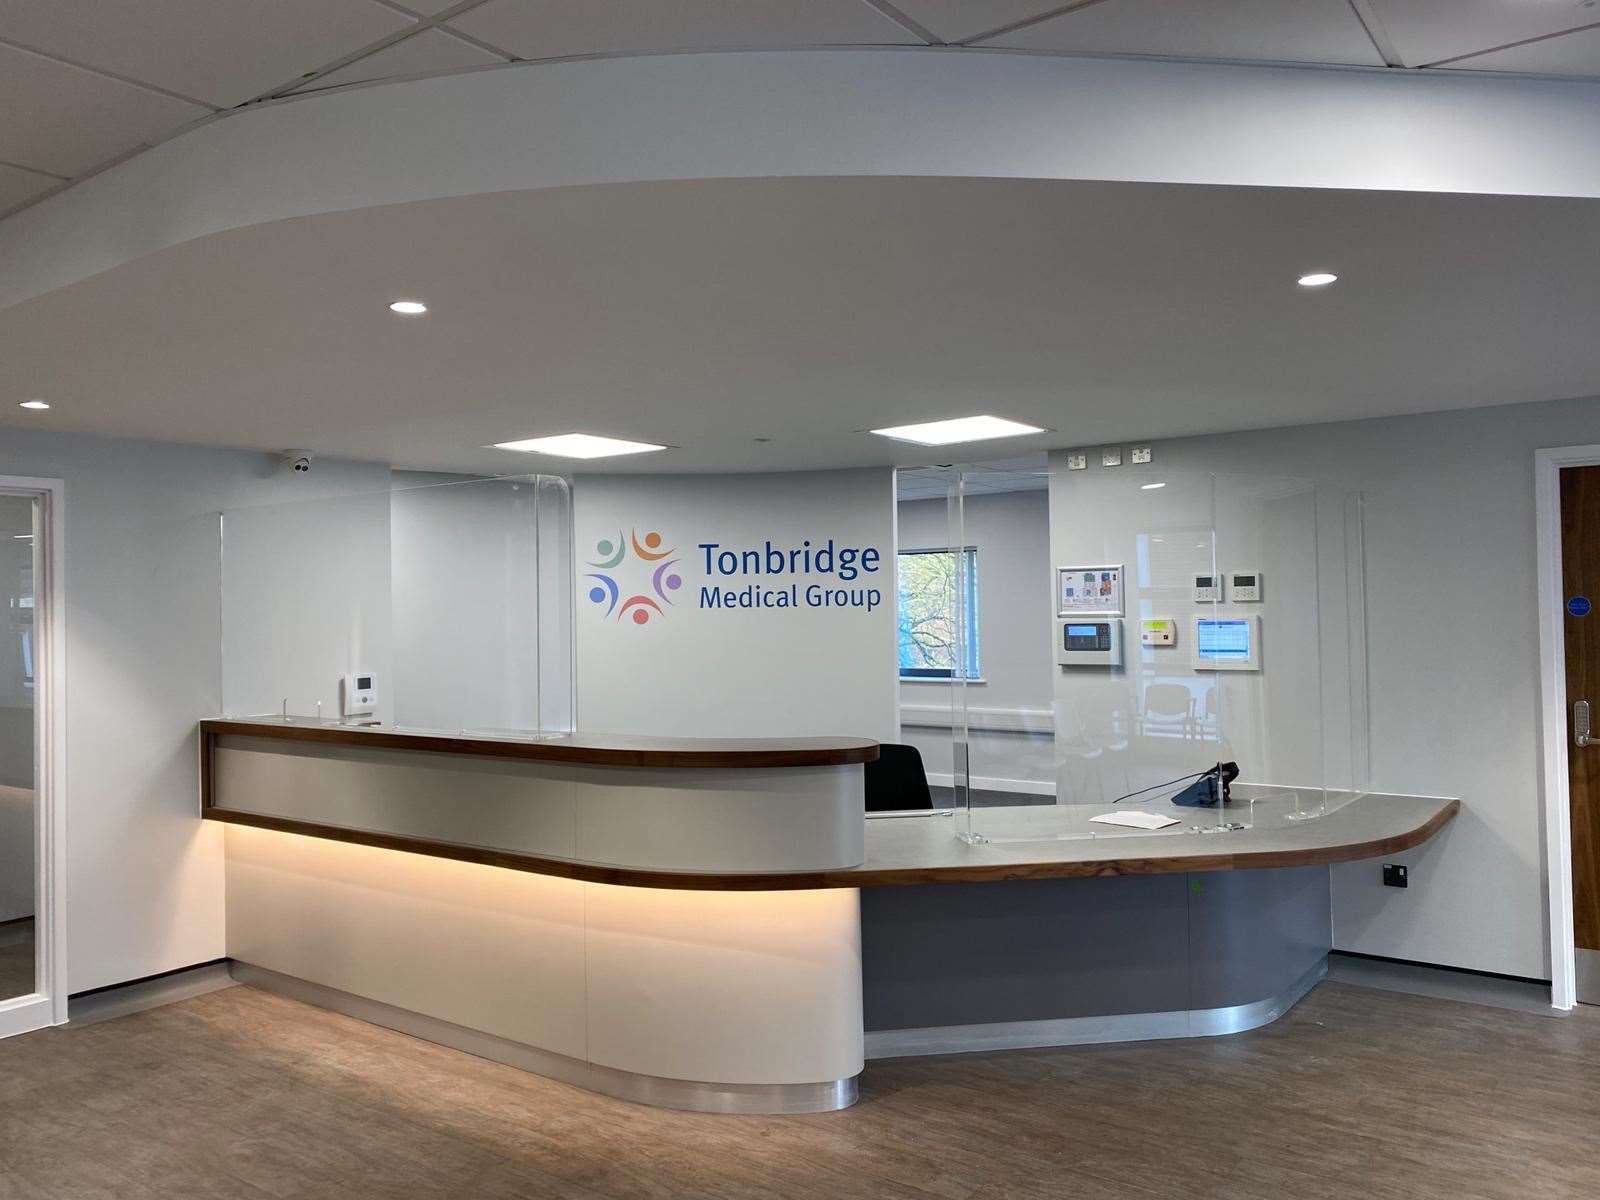 The reception area at the new Tonbridge Medical Group's centre in River Lawn